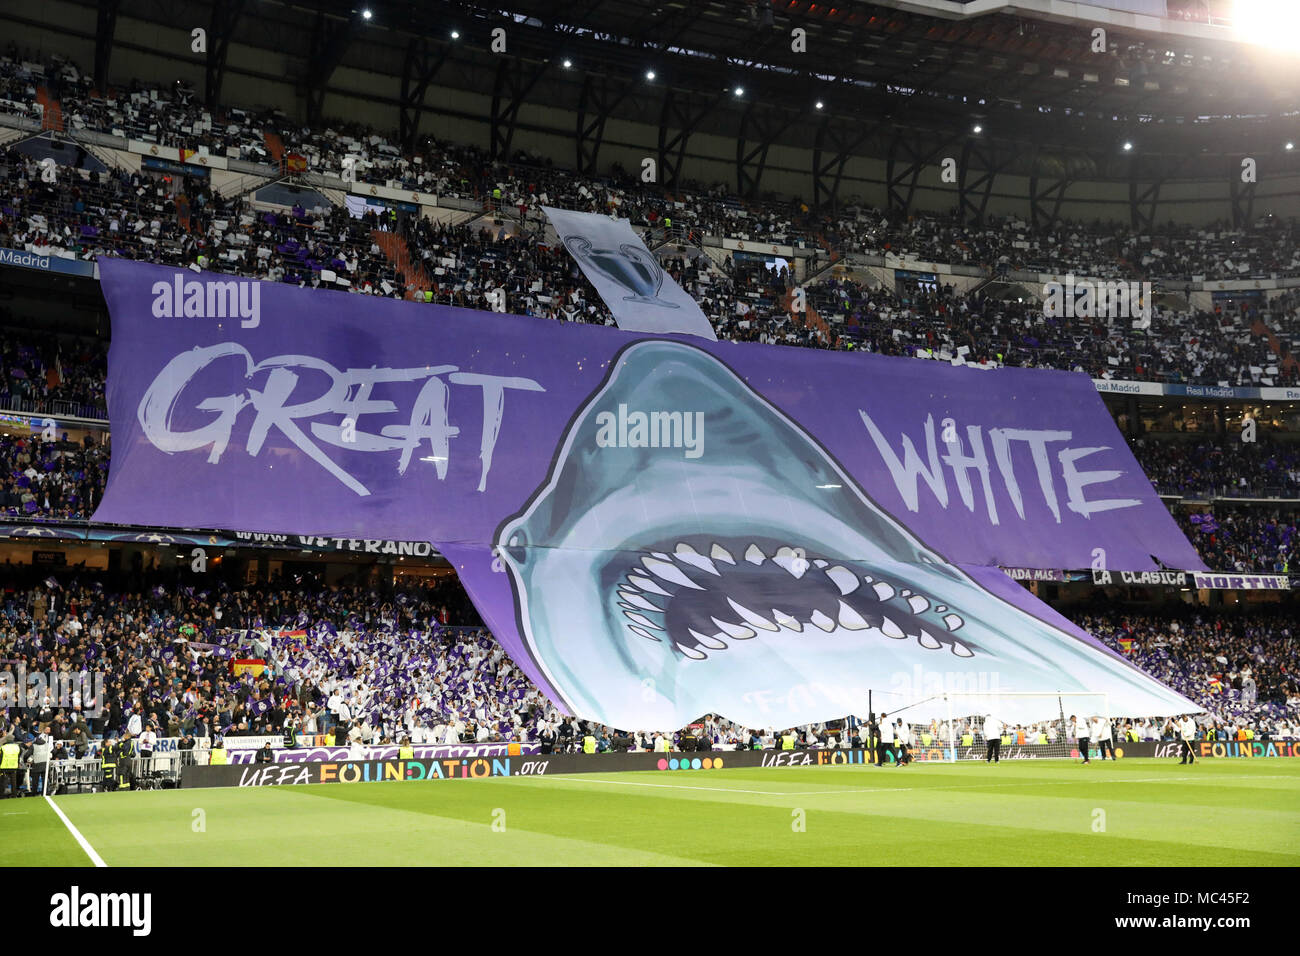 Madrid, Spain. 11th Apr, 2018. SUPPORTERS of Real Madrid display a giant banner ahead of the UEFA Champions League, quarter final, 2nd leg football match between Real Madrid CF and Juventus FC on April 11, 2018 at Santiago Bernabeu stadium in Madrid, Spain Credit: Manuel Blondeau/ZUMA Wire/Alamy Live News Stock Photo